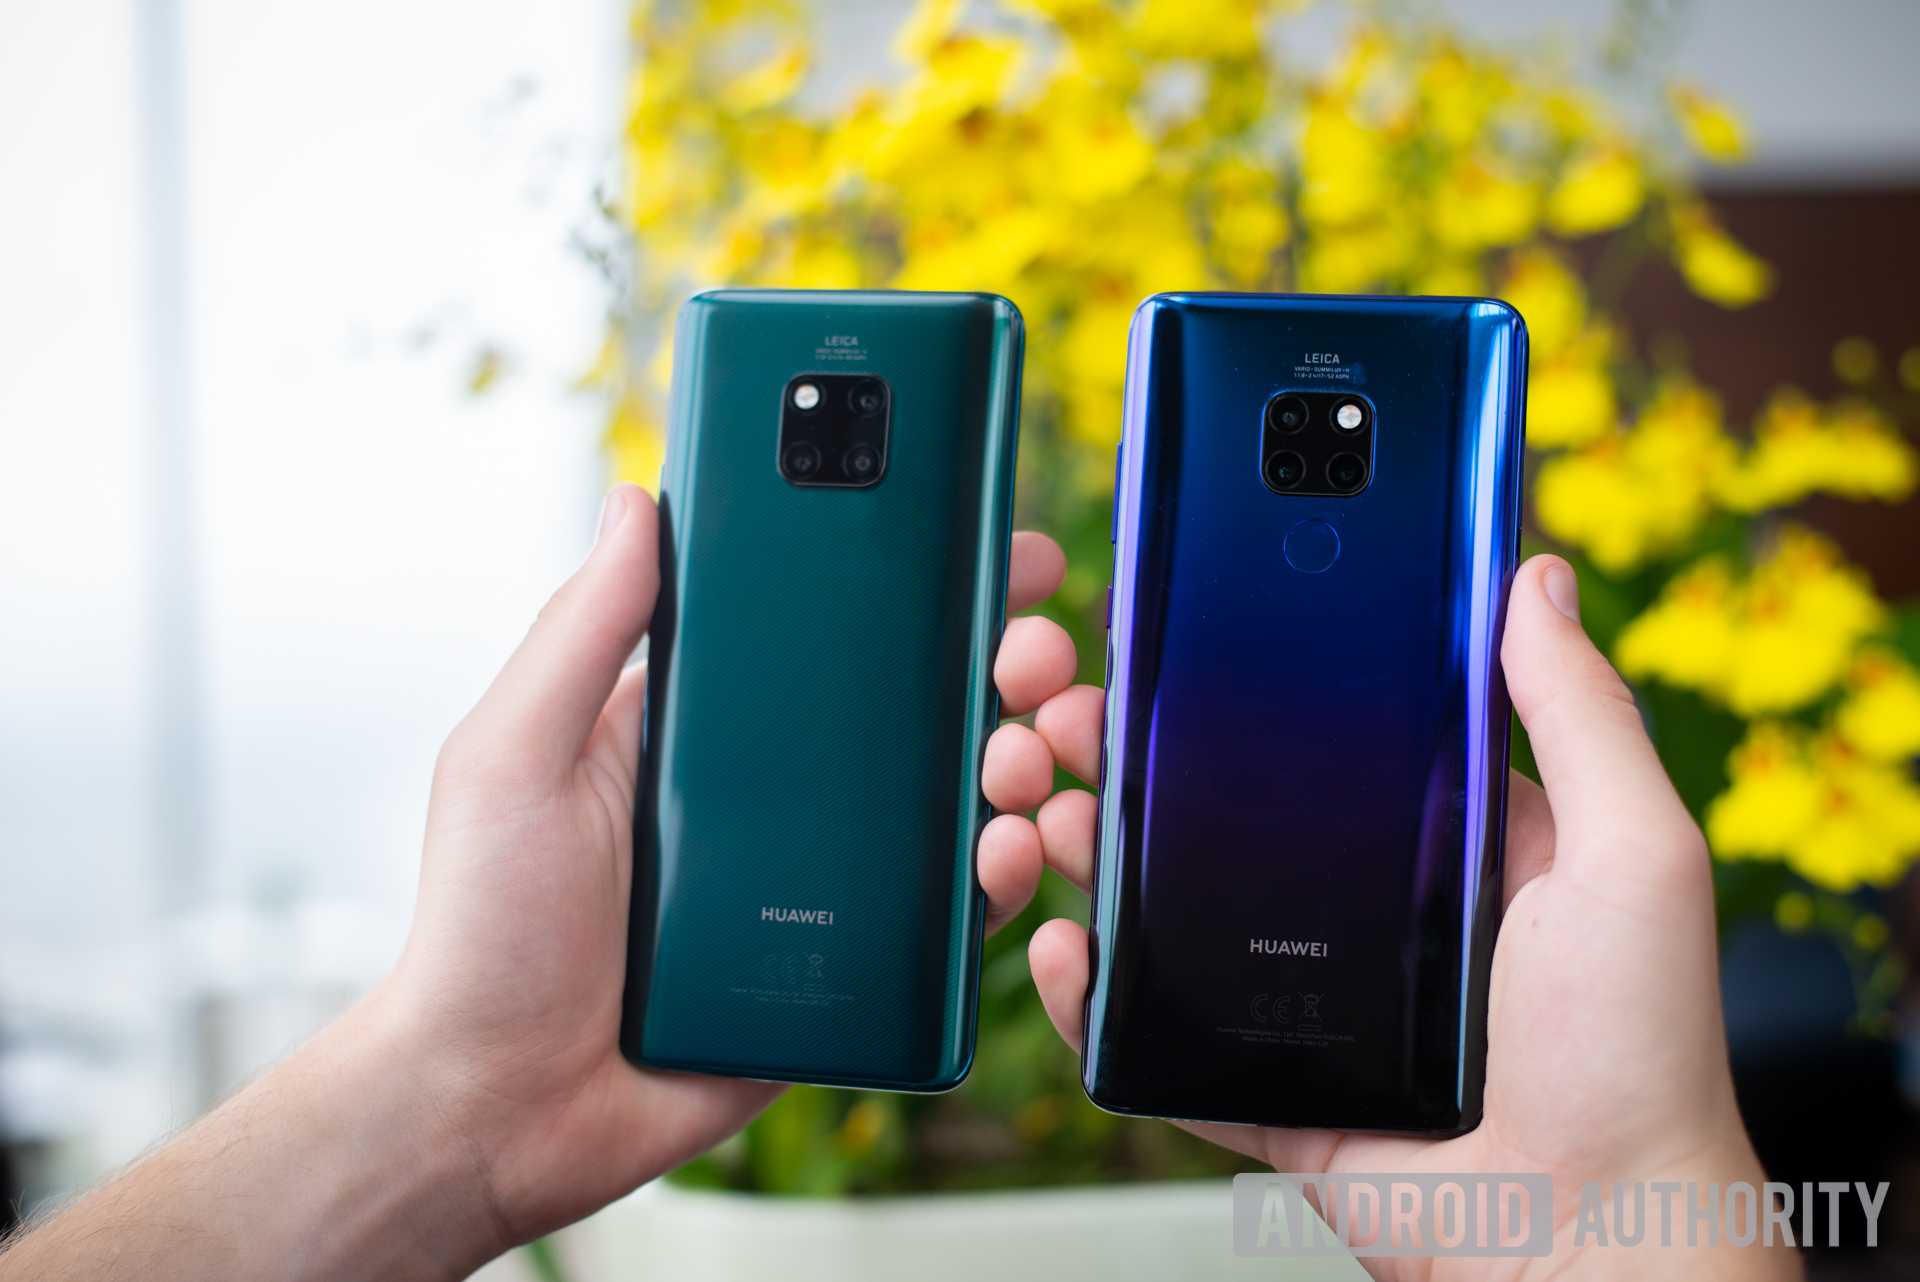 brydning Midler jazz HUAWEI Mate 20 Pro and HUAWEI Mate 20: Specs, release date, price